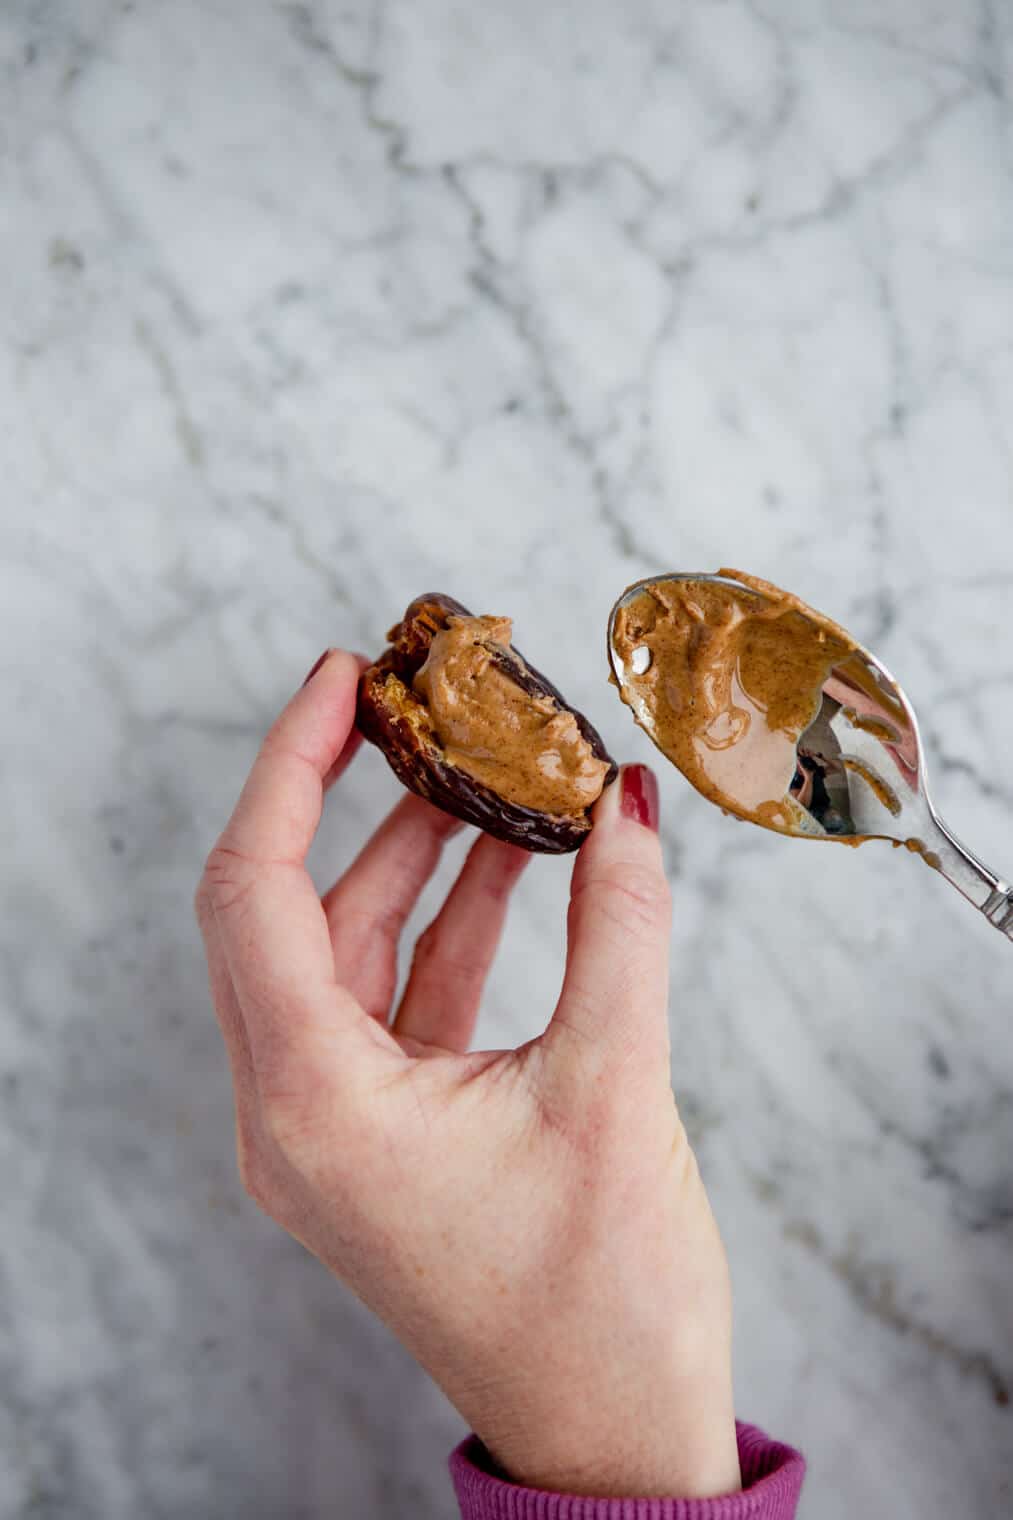 One hand holding pitted date filled with almond butter, other hand holding a spoon with almond butter.